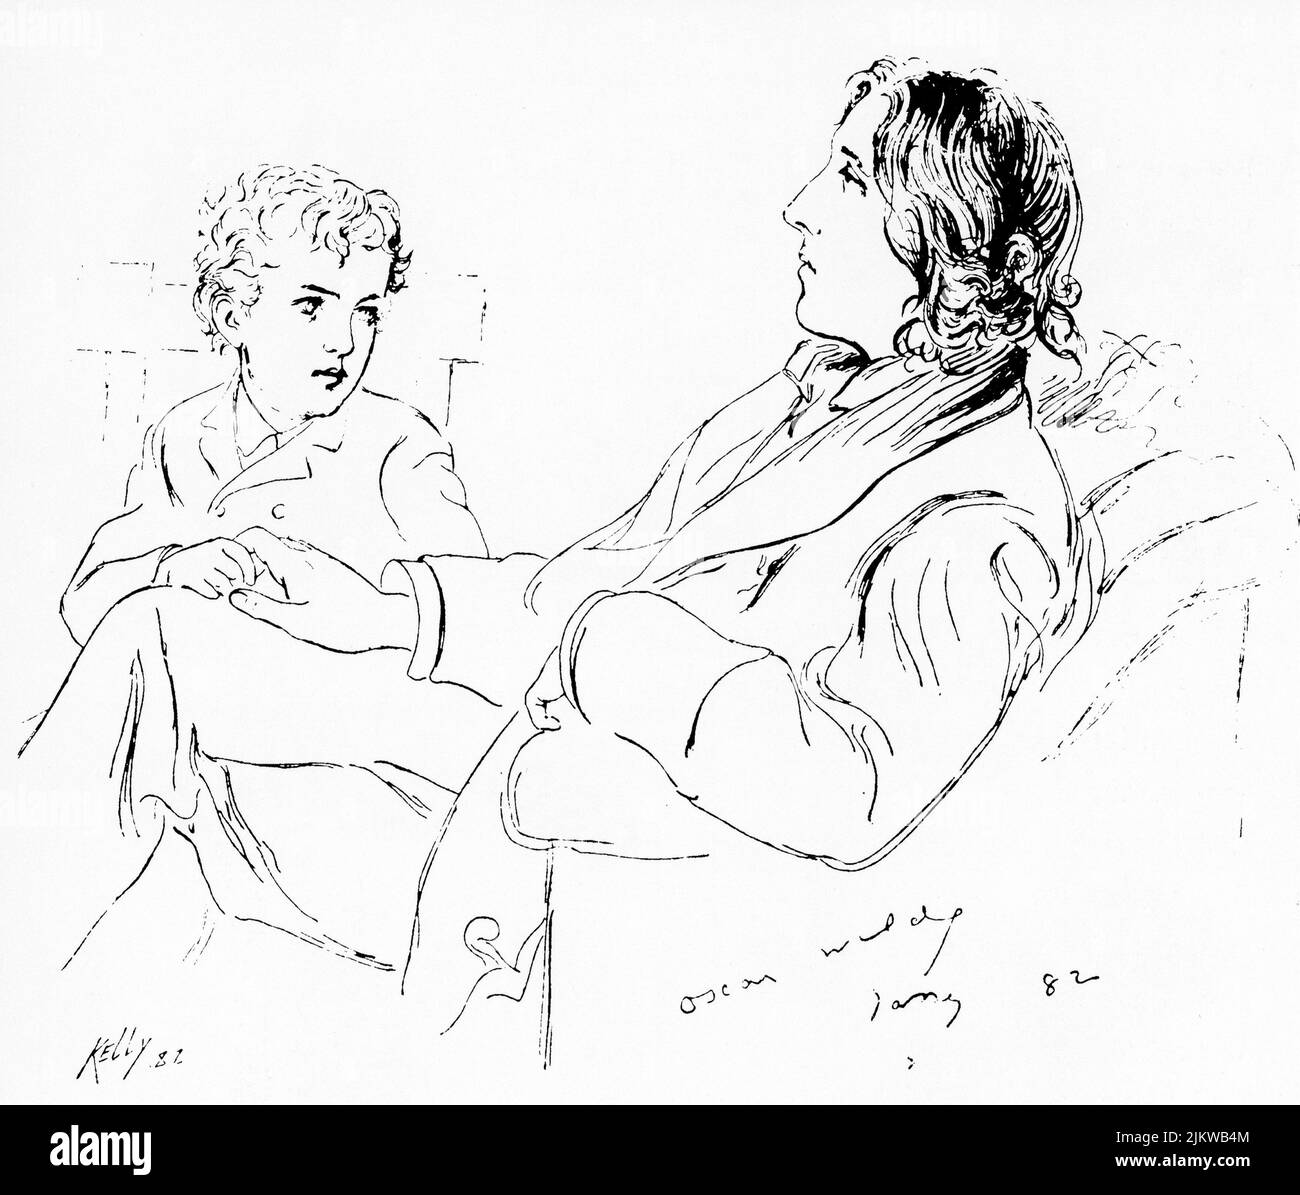 1882 , january , London , England    : The celebrated irish writer and dramatist OSCAR WILDE ( 1854 - 1900 ) in a drawing by James Edward Kelly , the boy as the son of painter  - SCRITTORE - LETTERATURA - LITERATURE - POET - POETA - POESIA - DRAMMATURGO - playwriter - play-writer - TEATRO - THEATER - THEATRE  - POETRY  - GAY - HOMOSEXUAL - HOMOSEXUALITY - omosessuale - omosessualità - profilo - profile  ----  Archivio GBB Stock Photo